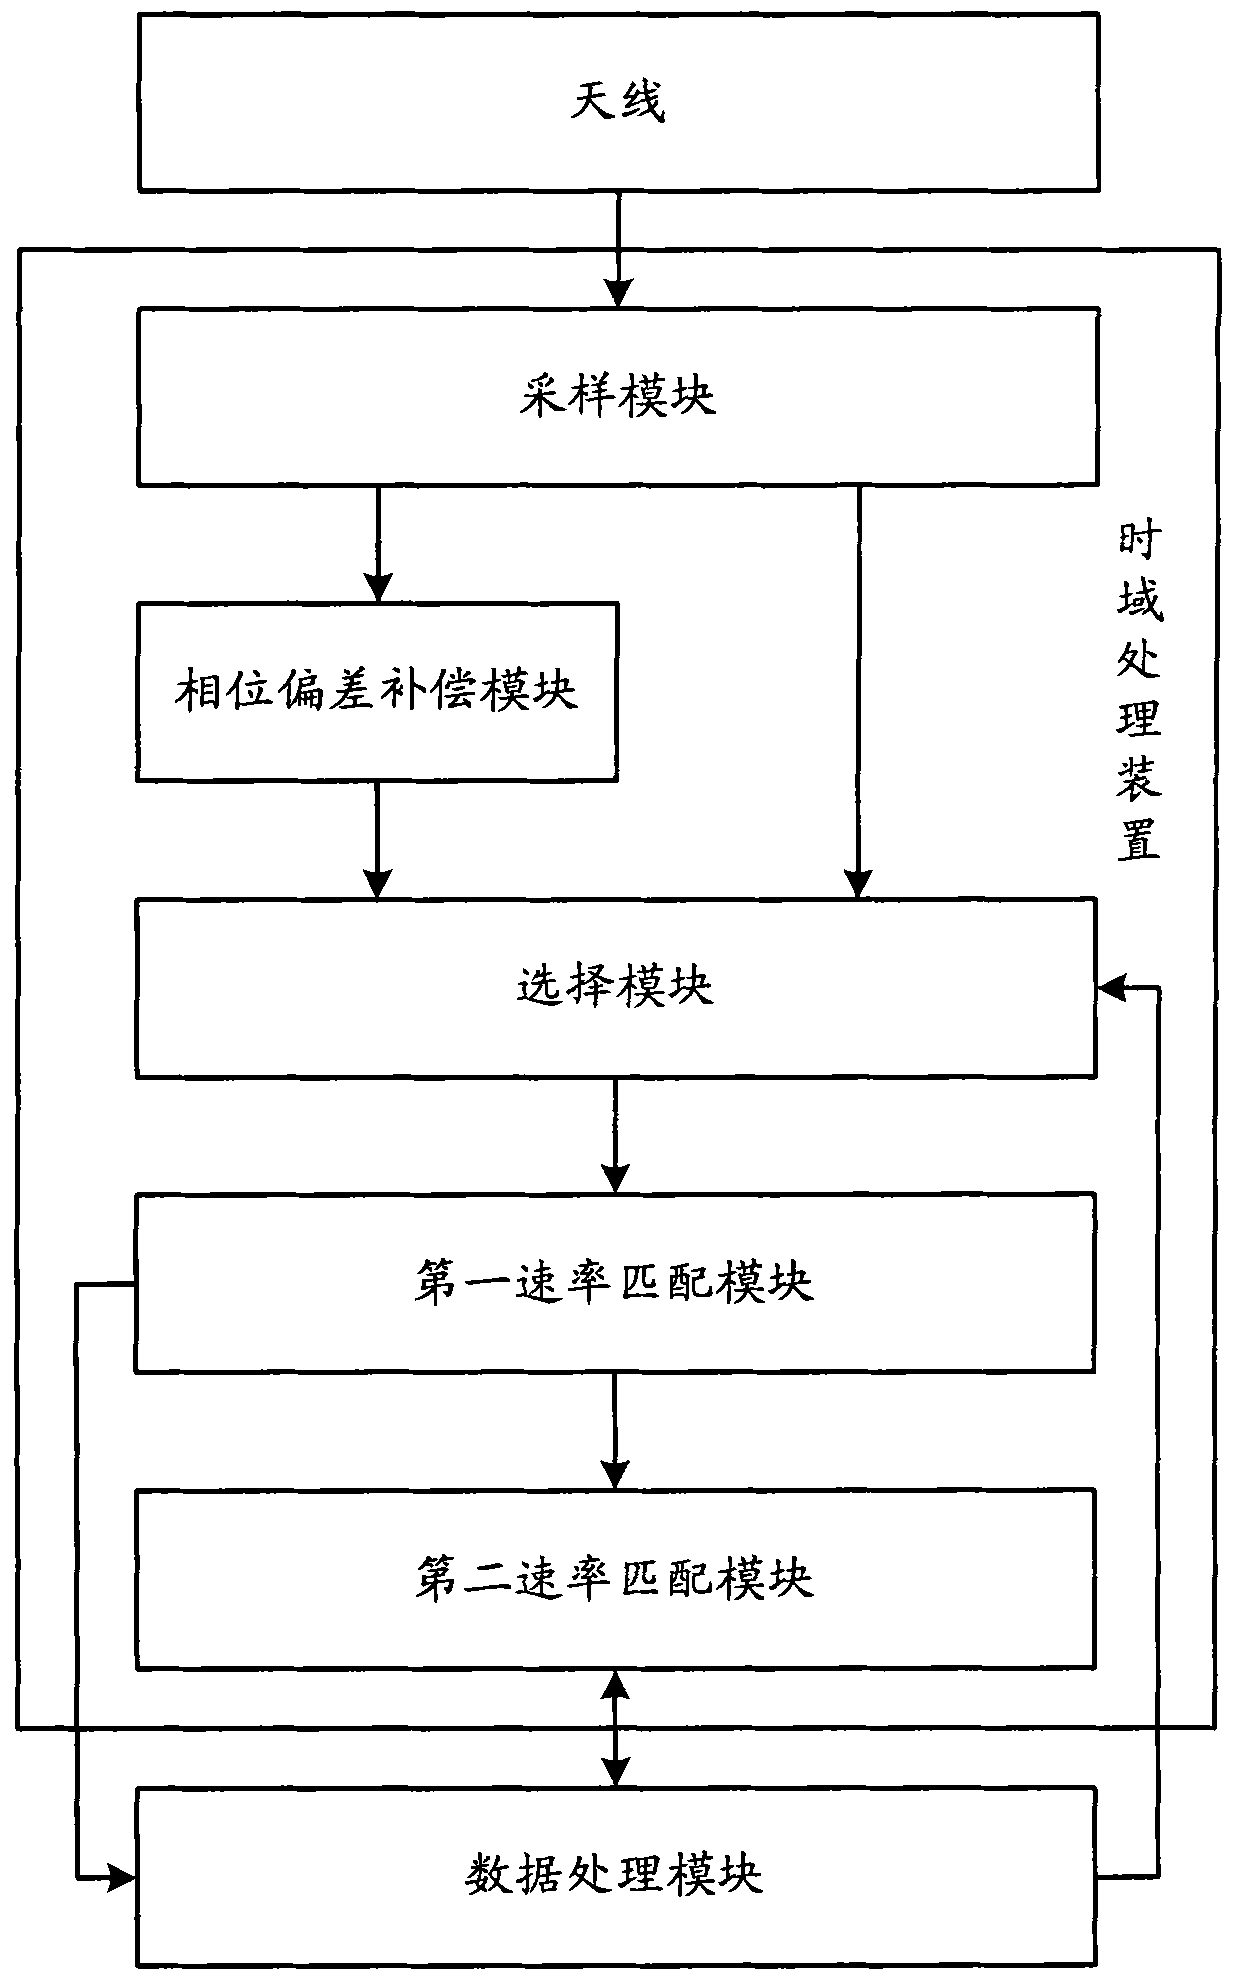 Time domain processing device, mobile communication terminal and data processing method